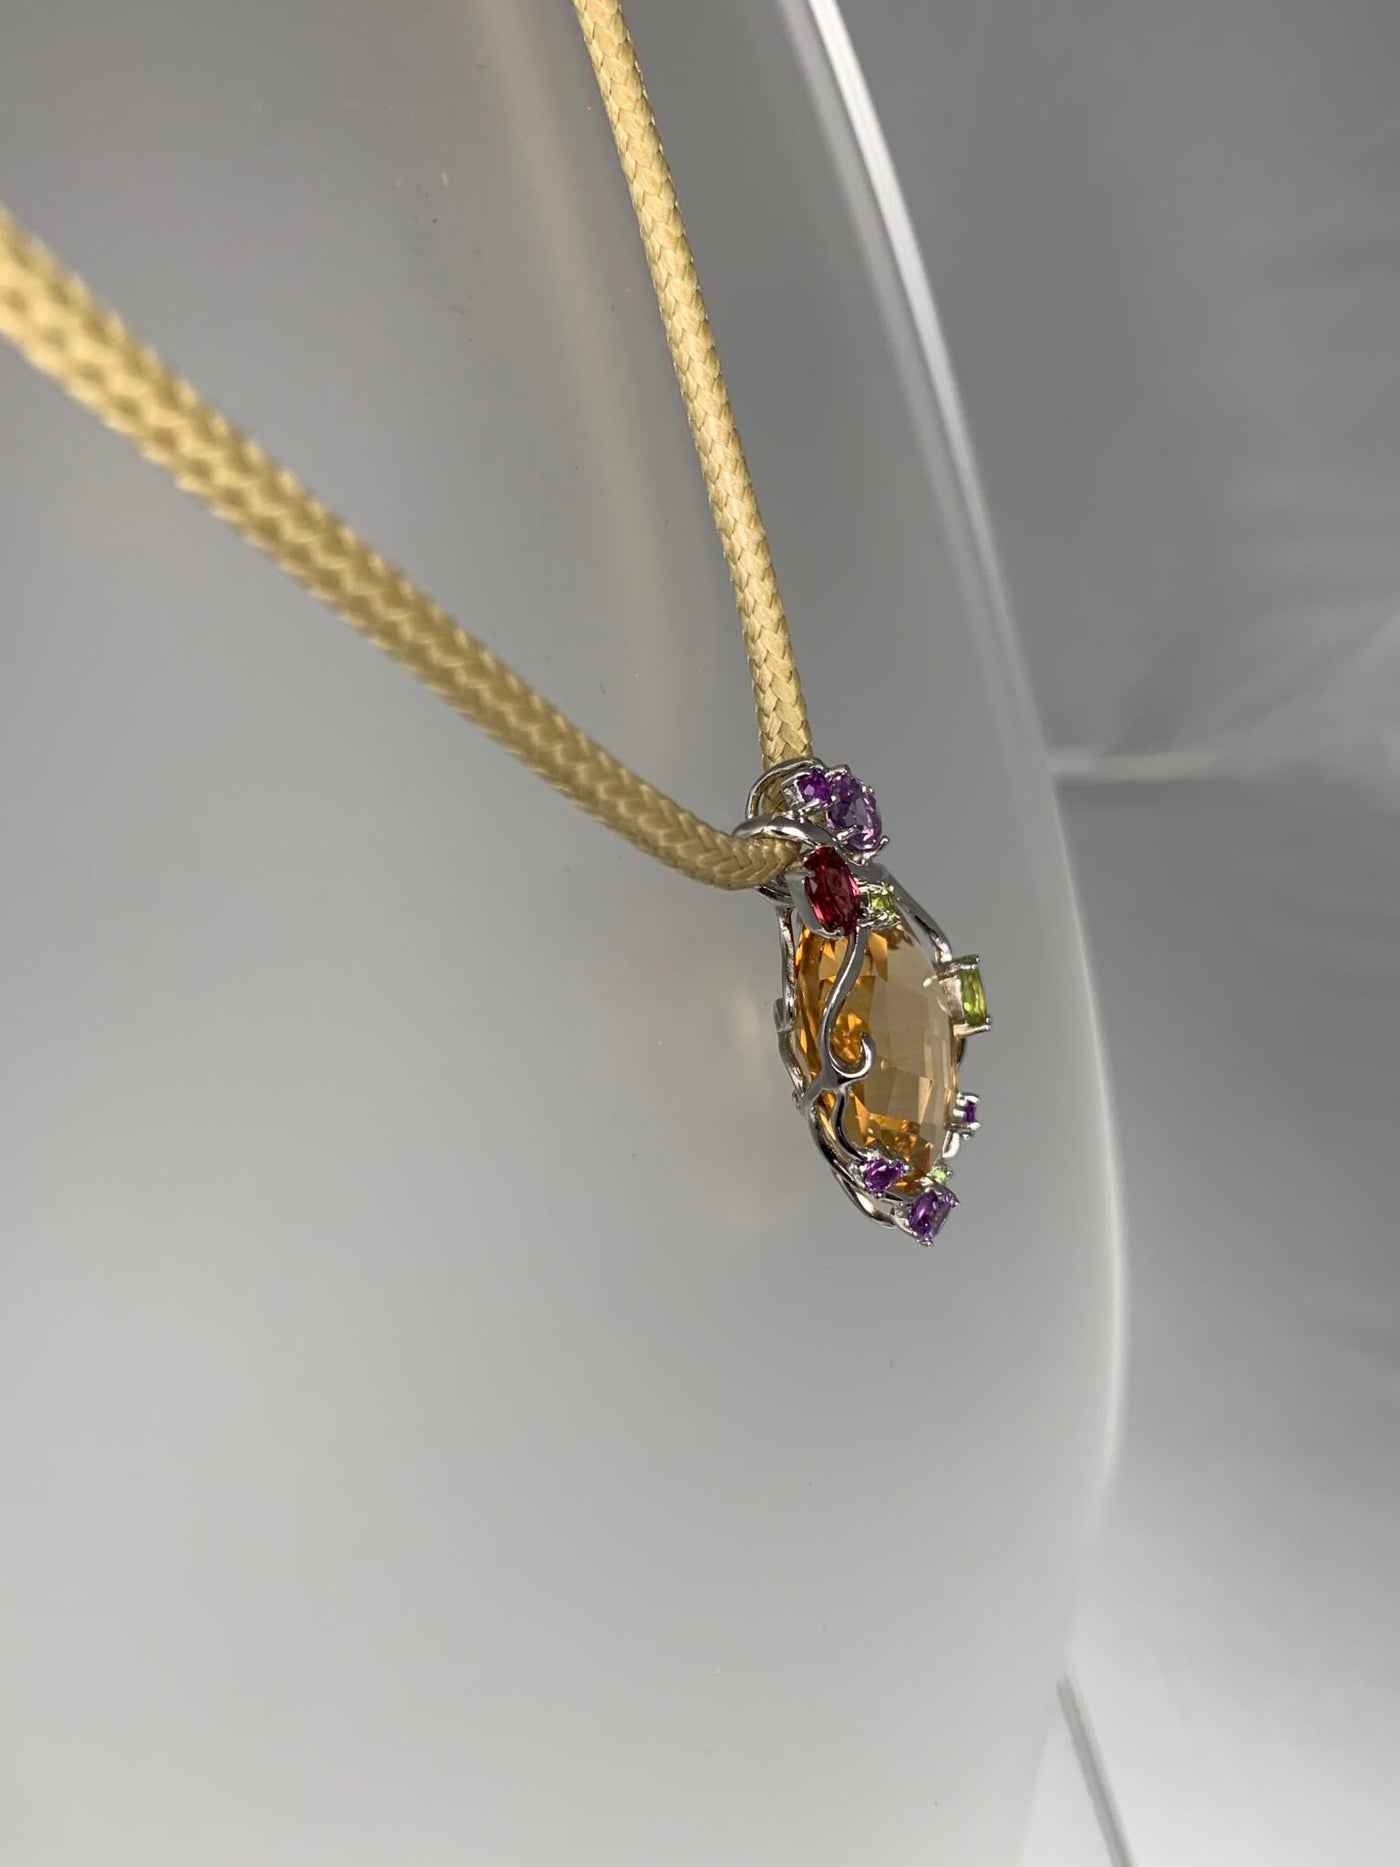 Sterling Silver and Oval "Amber Yellow" CZ Pendant with Genuine Gems Accent